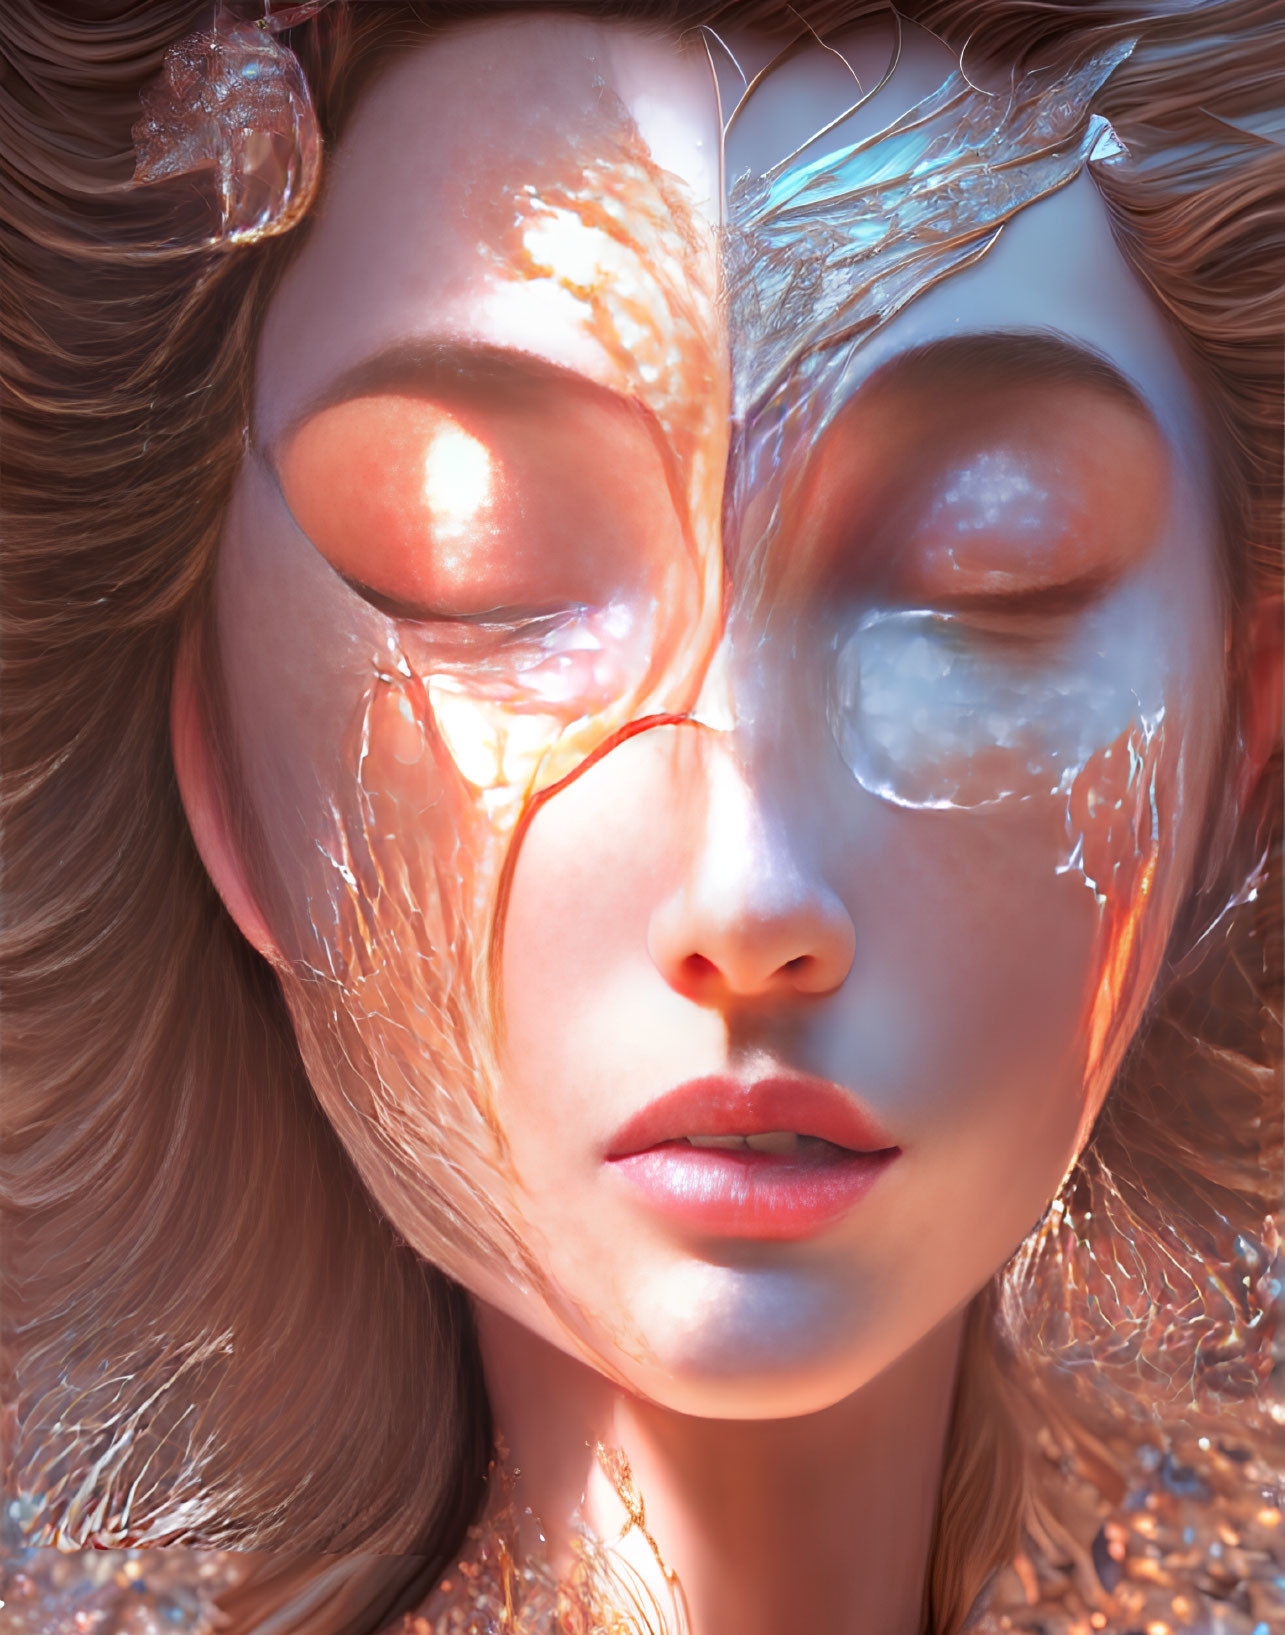 Digital Art: Close-Up Woman's Face with Translucent, Glowing Skin & Golden Foliage